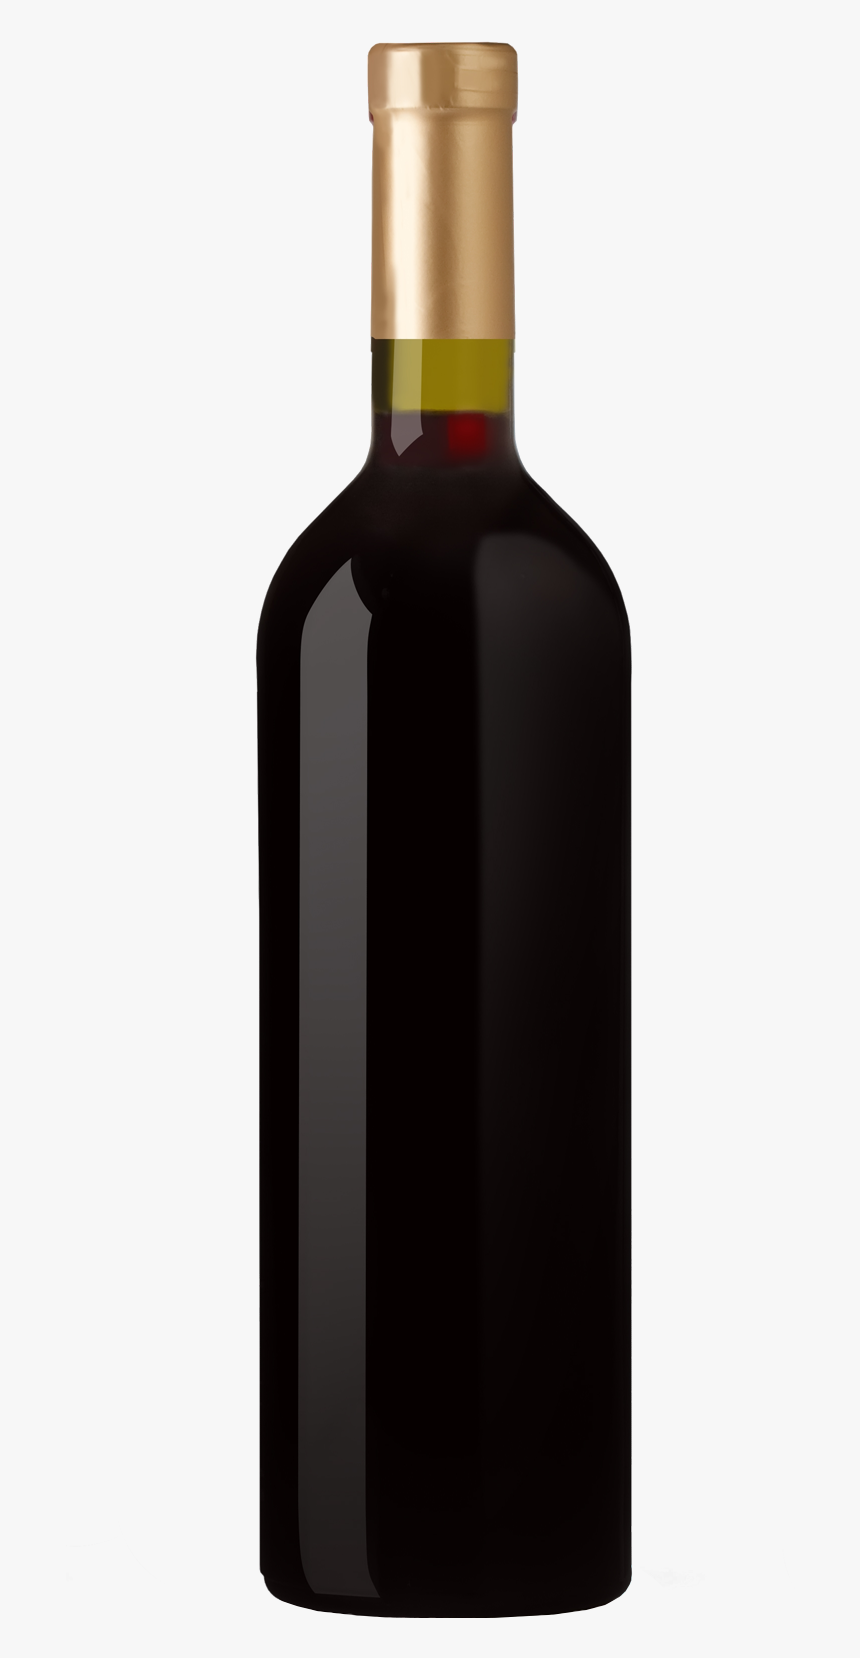 Previous Item Layer-157 Next Item Korz - Blank Red Wine Bottle, HD Png Download, Free Download